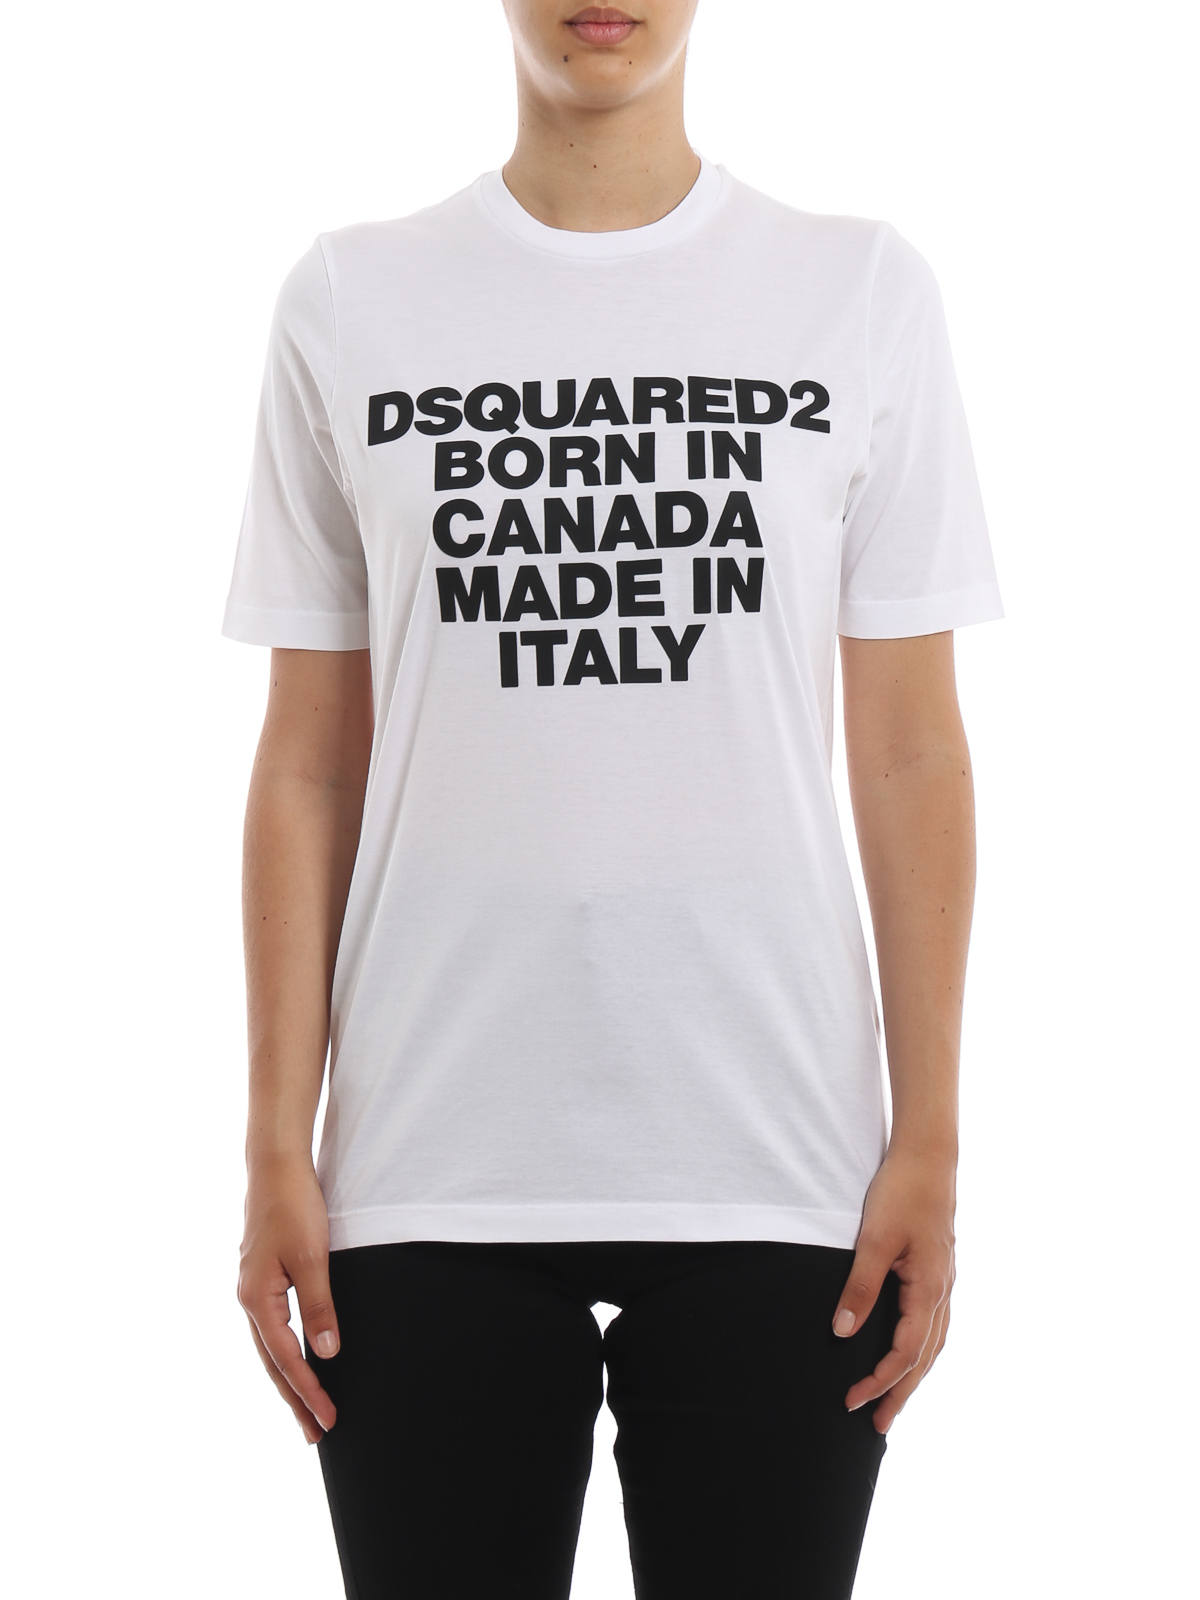 dsquared born in canada made in italy